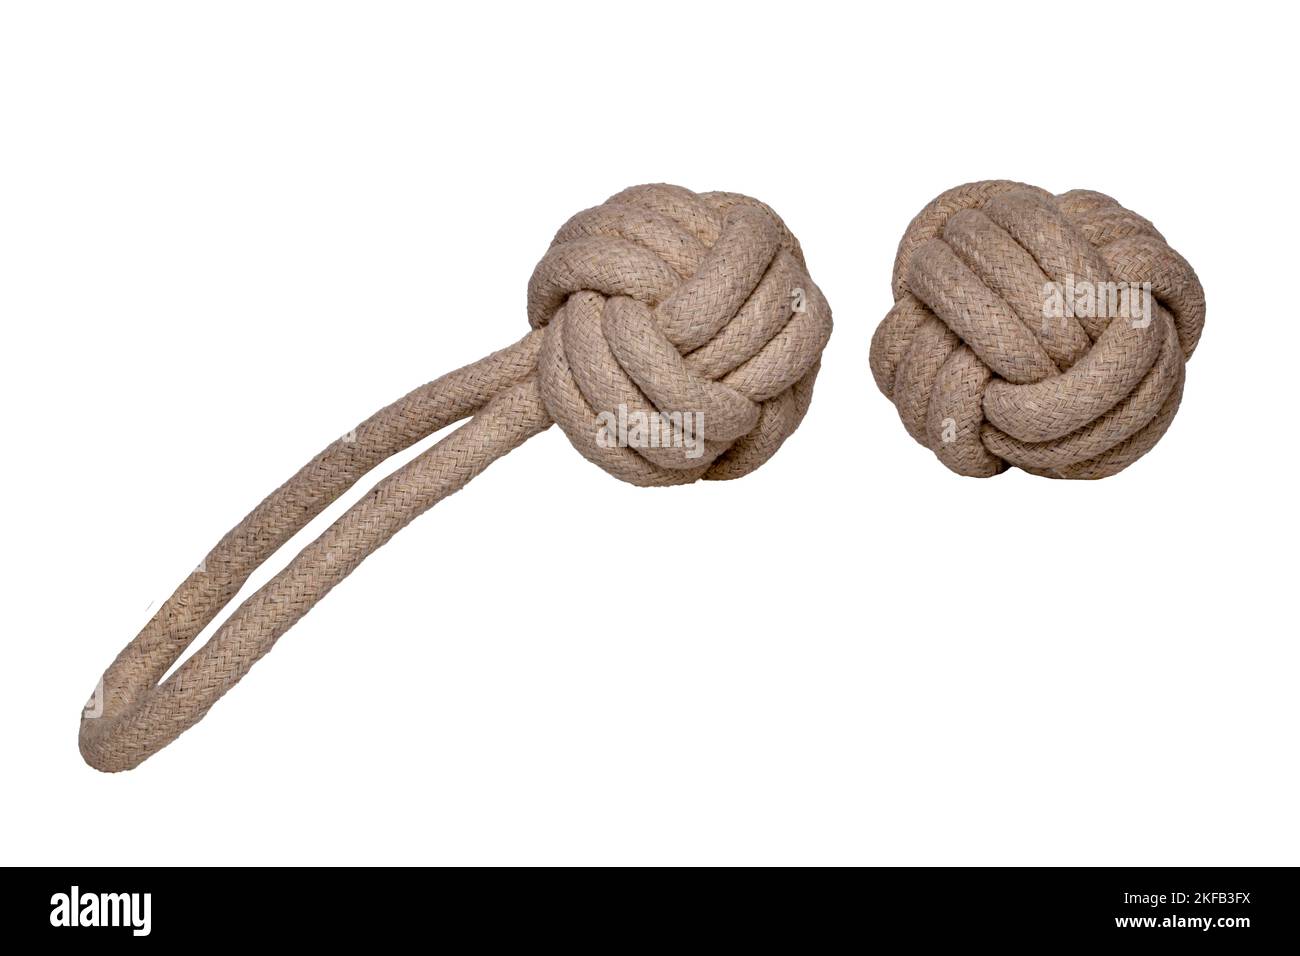 Rope isolated. Close-up of two rope knote balls. Macro. Knoted rope dog toy. Stock Photo